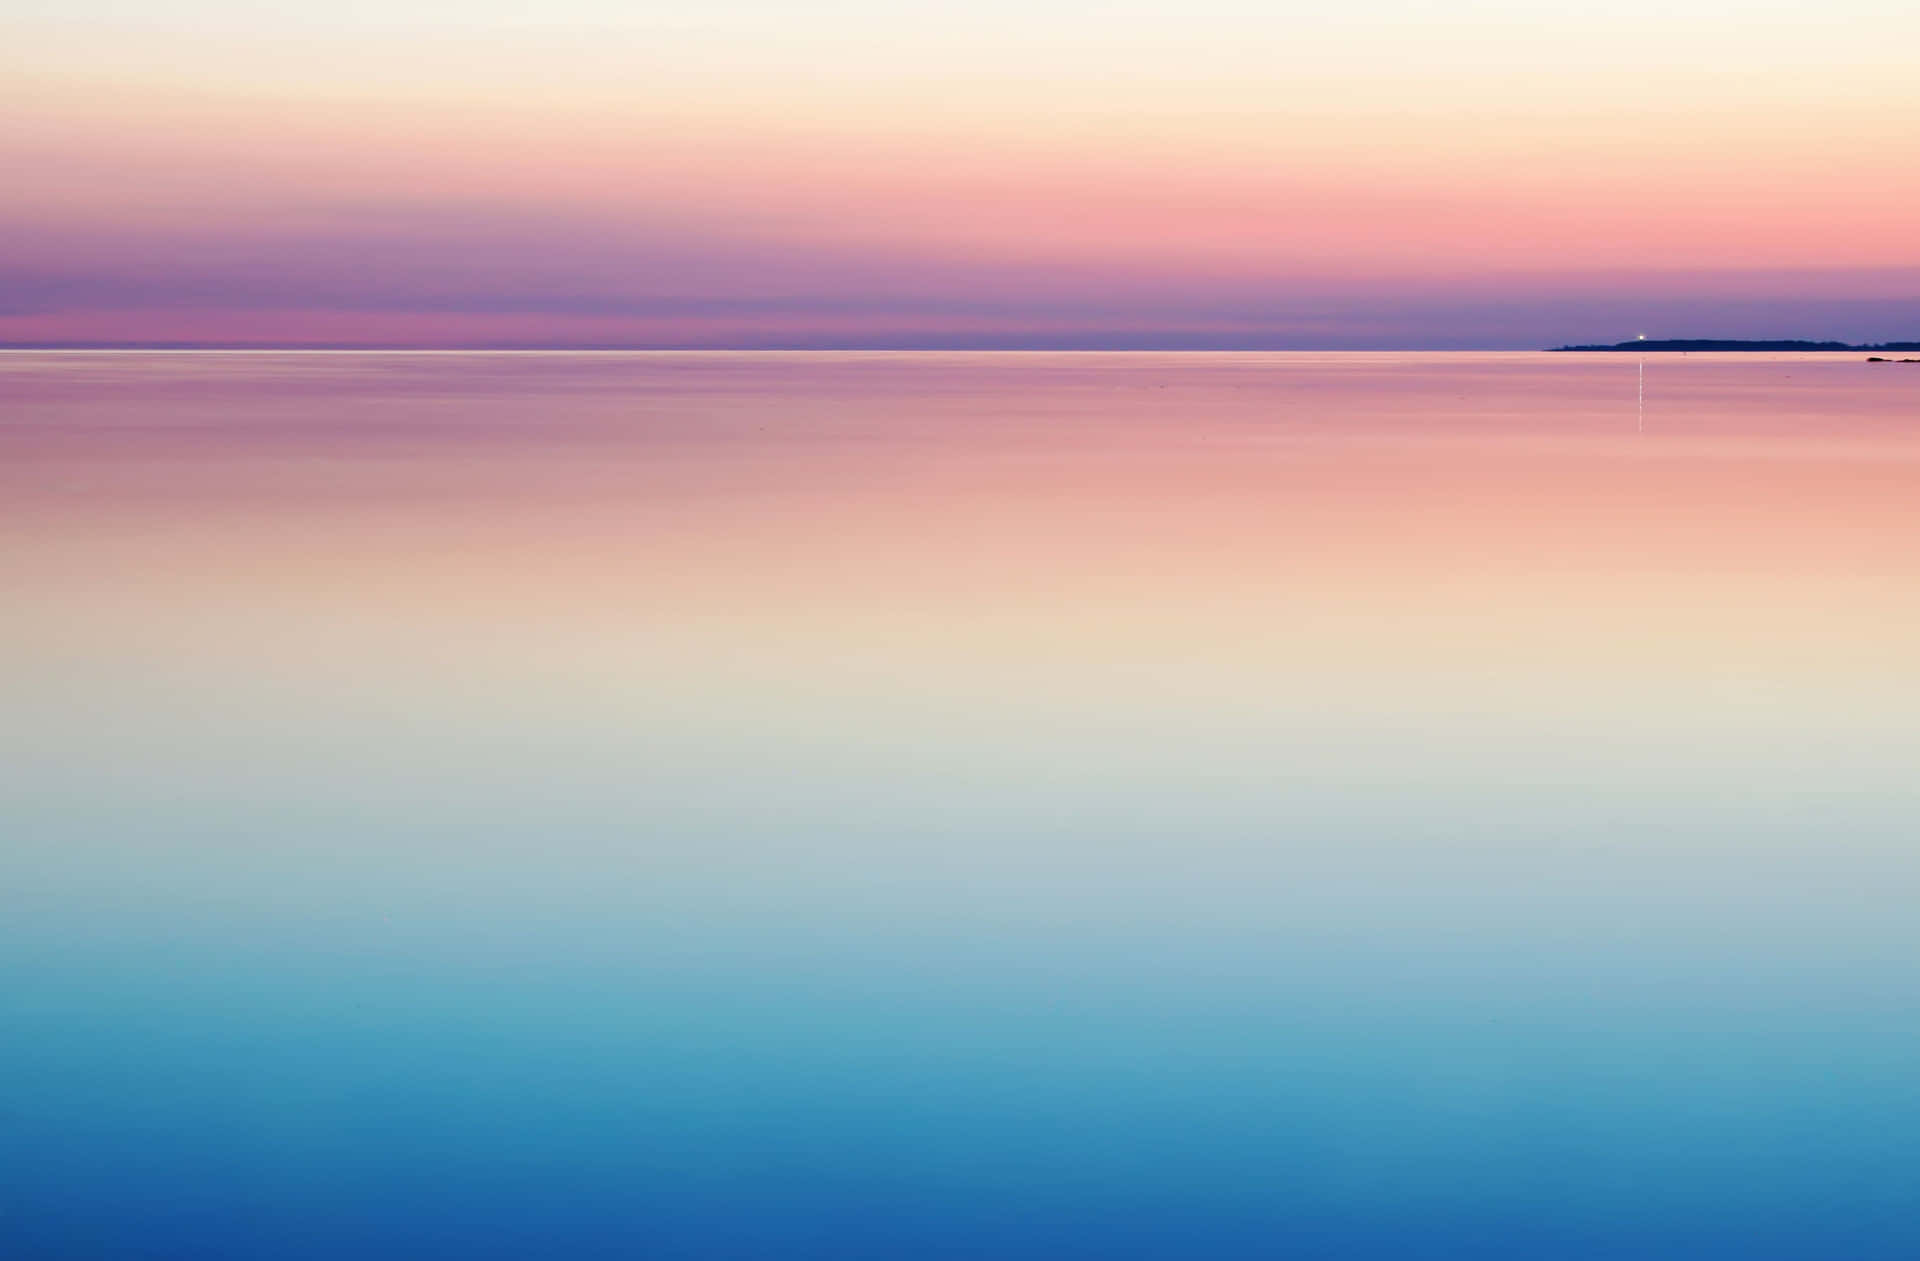 A Sunset Over A Calm Body Of Water Wallpaper